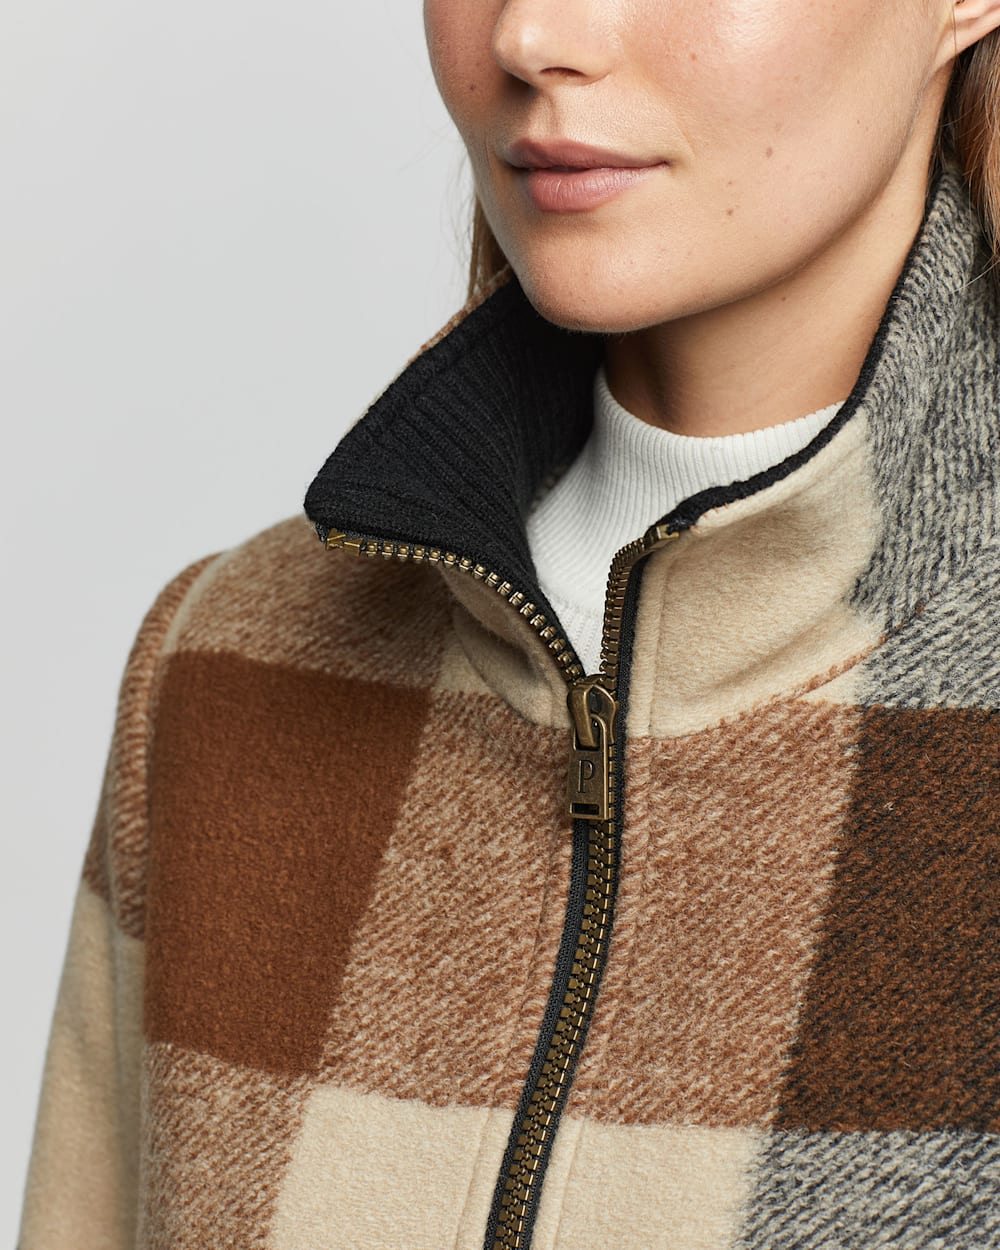 ALTERNATE VIEW OF WOMEN'S CAMDEN TOPPER COAT IN CAMEL/CHARCOAL PLAID image number 4